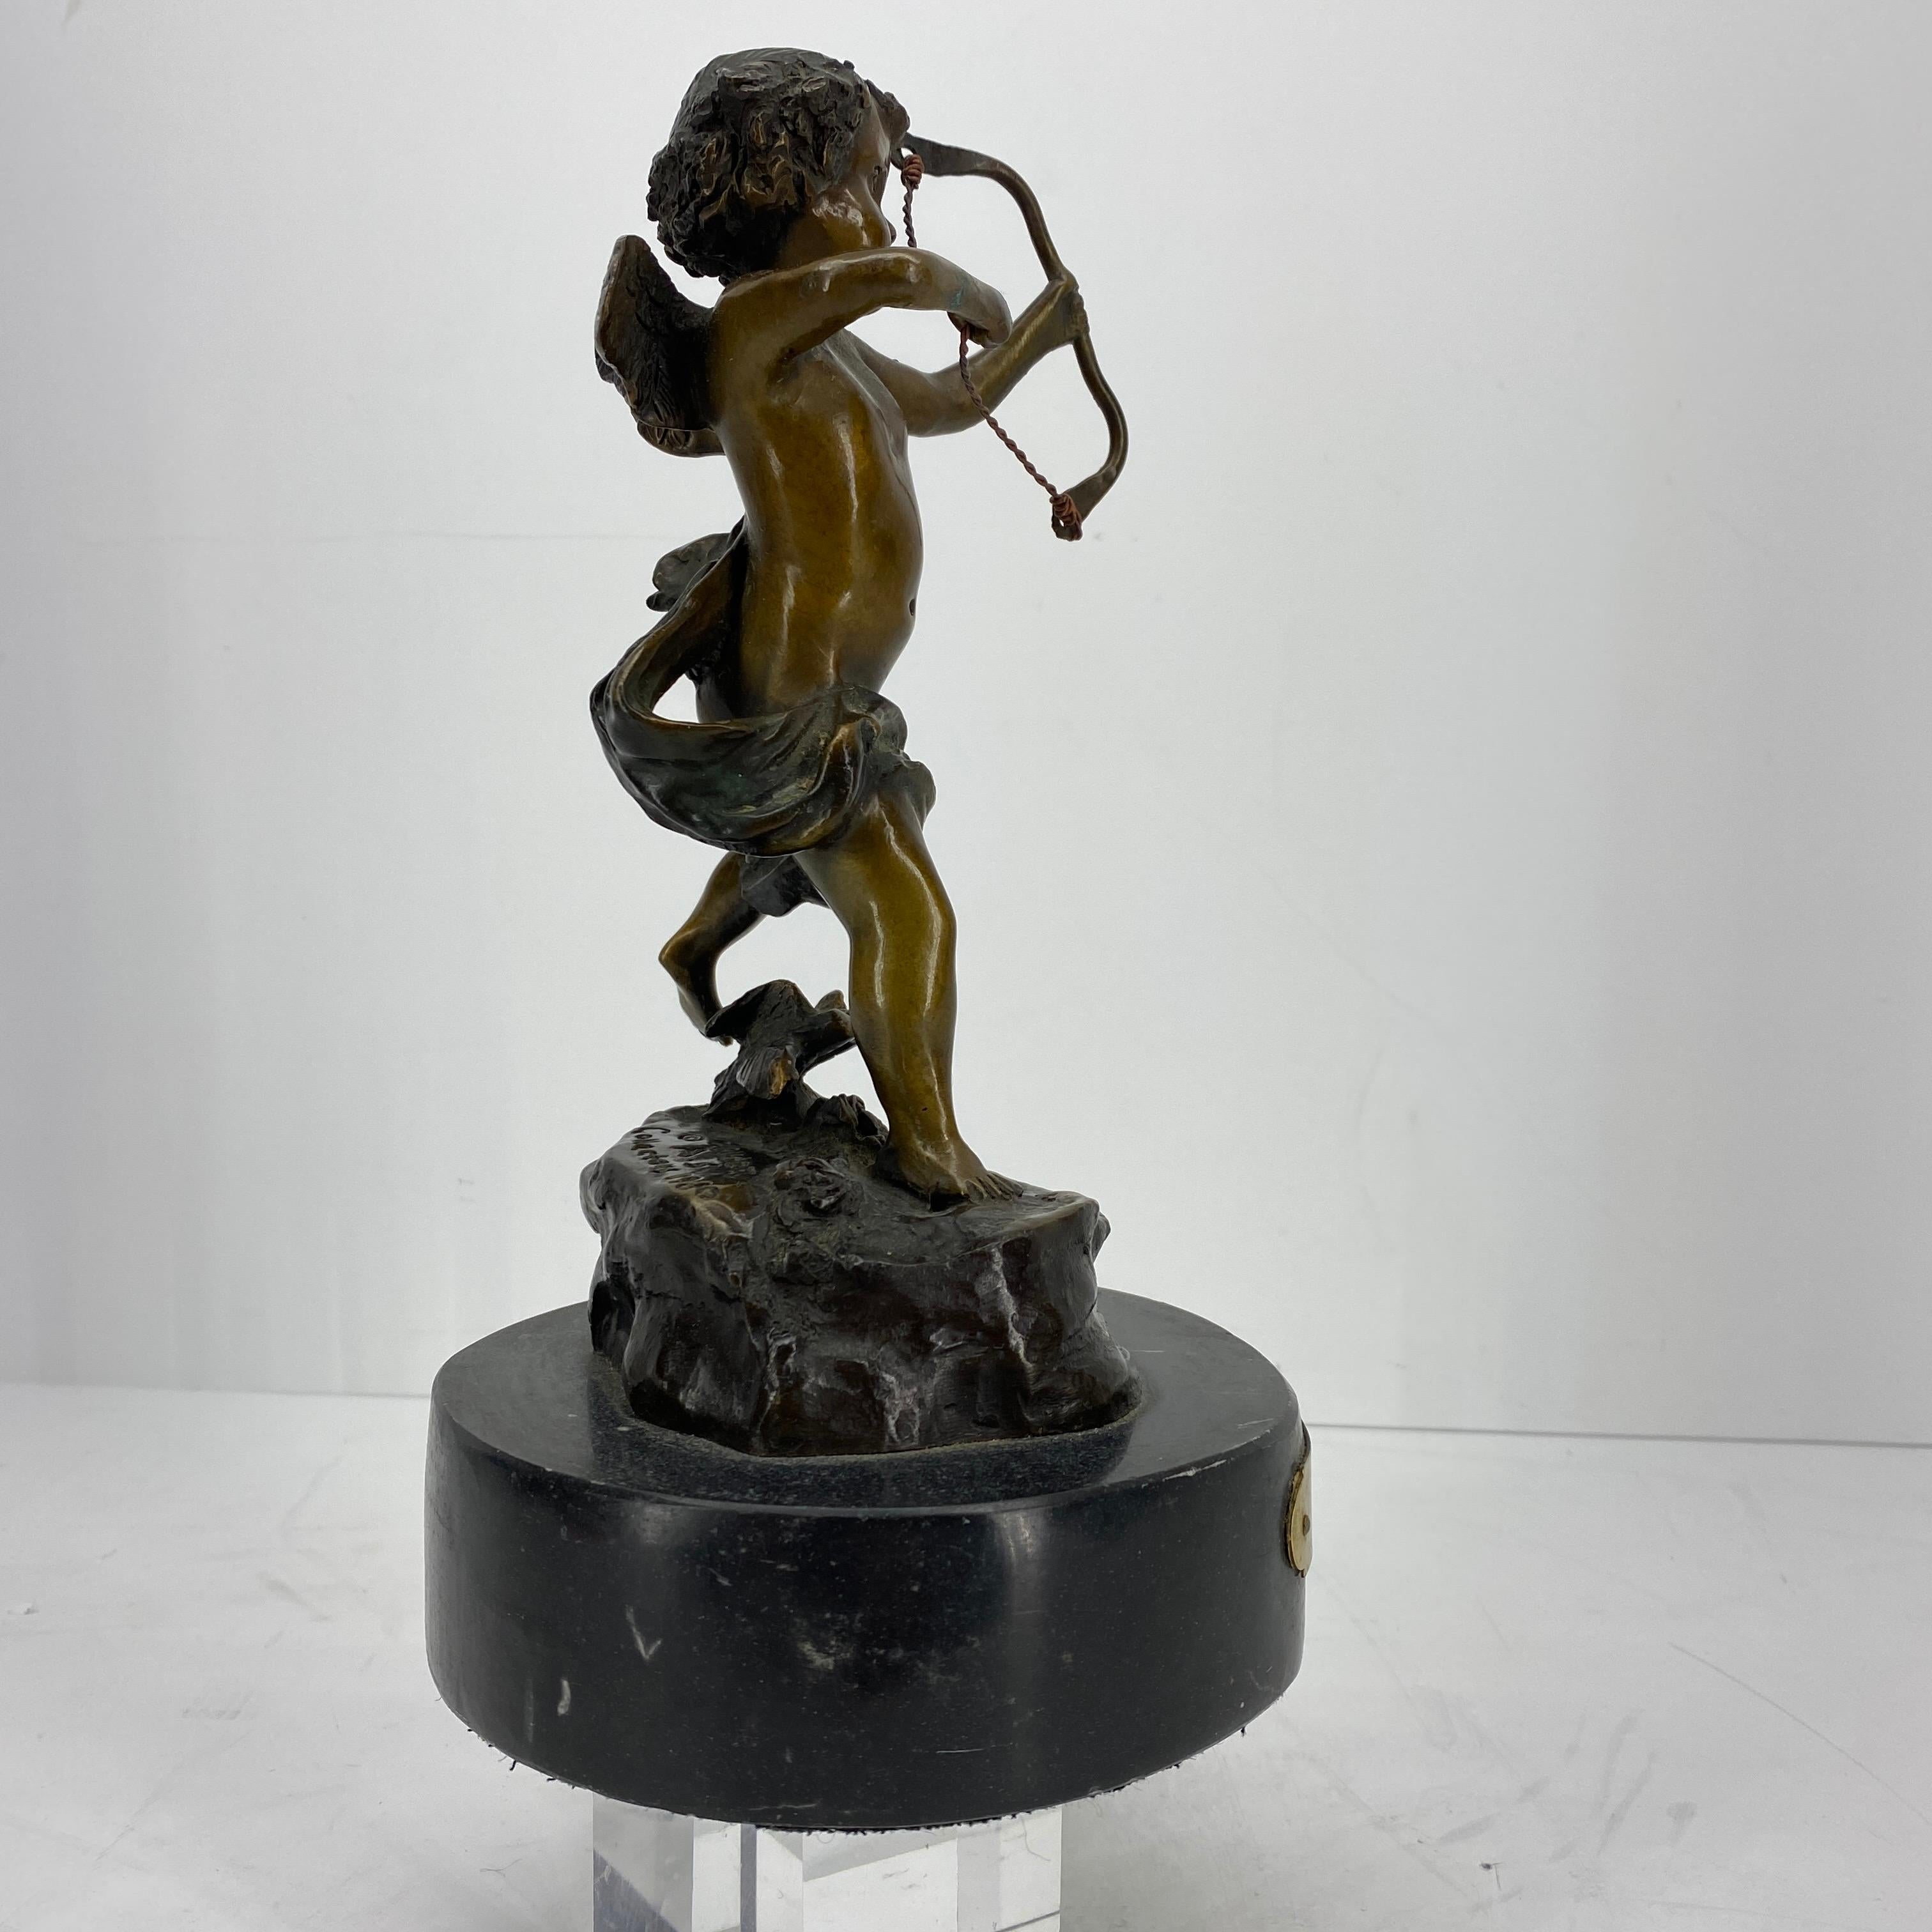 Small bronze cupid sculpture after models from Houdon, dated 1980. Sculpture is based on a thick black marble base.